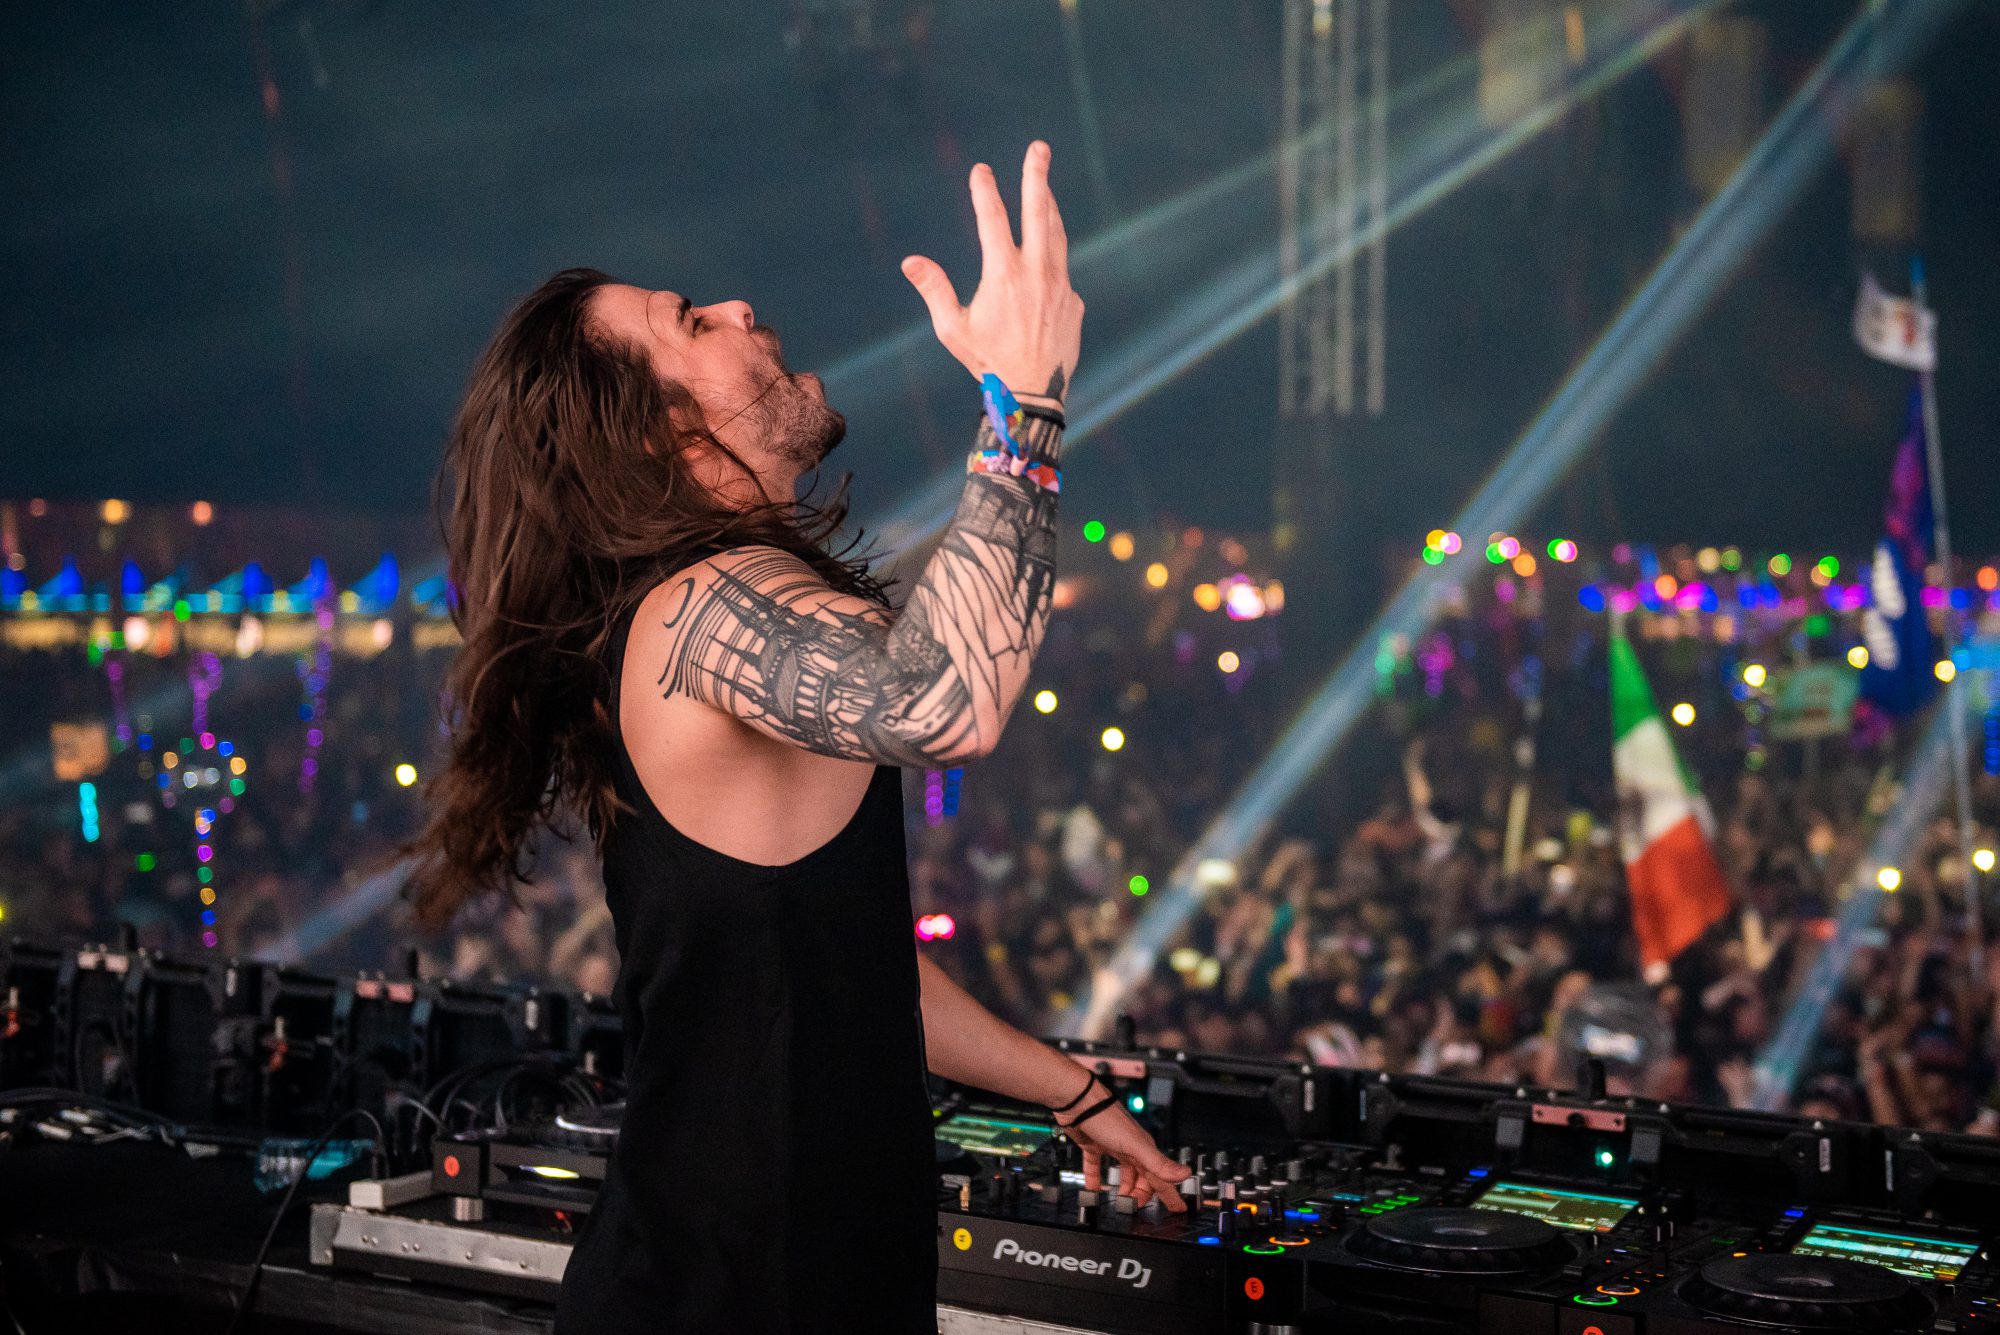 Seven Lions Announces Higher Love Show at Red Rocks.